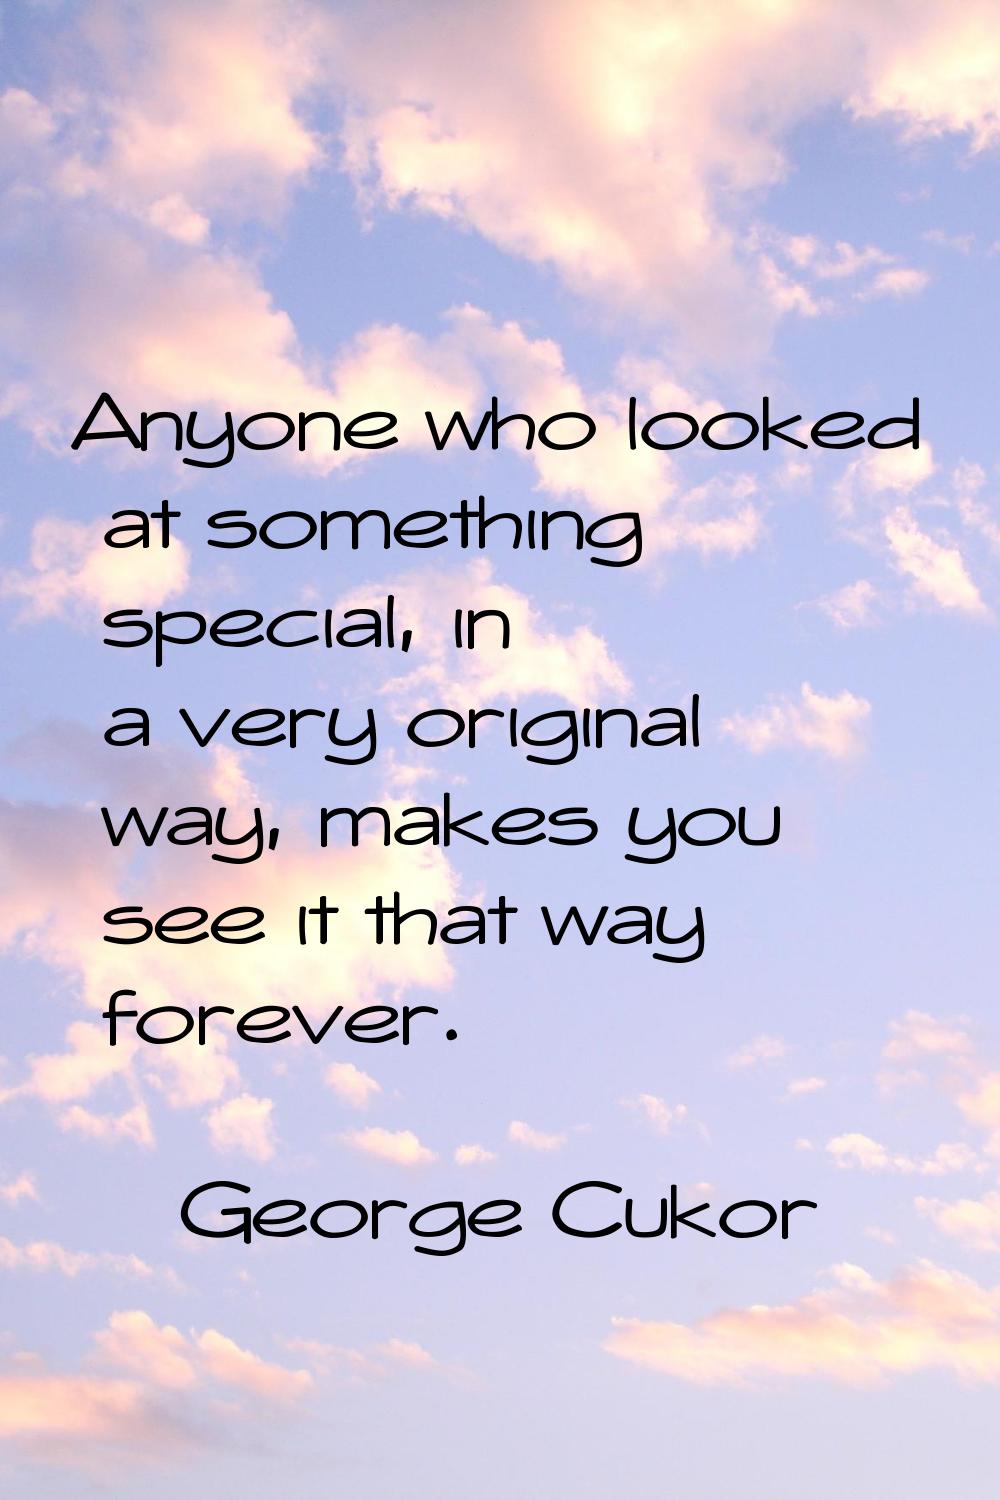 Anyone who looked at something special, in a very original way, makes you see it that way forever.